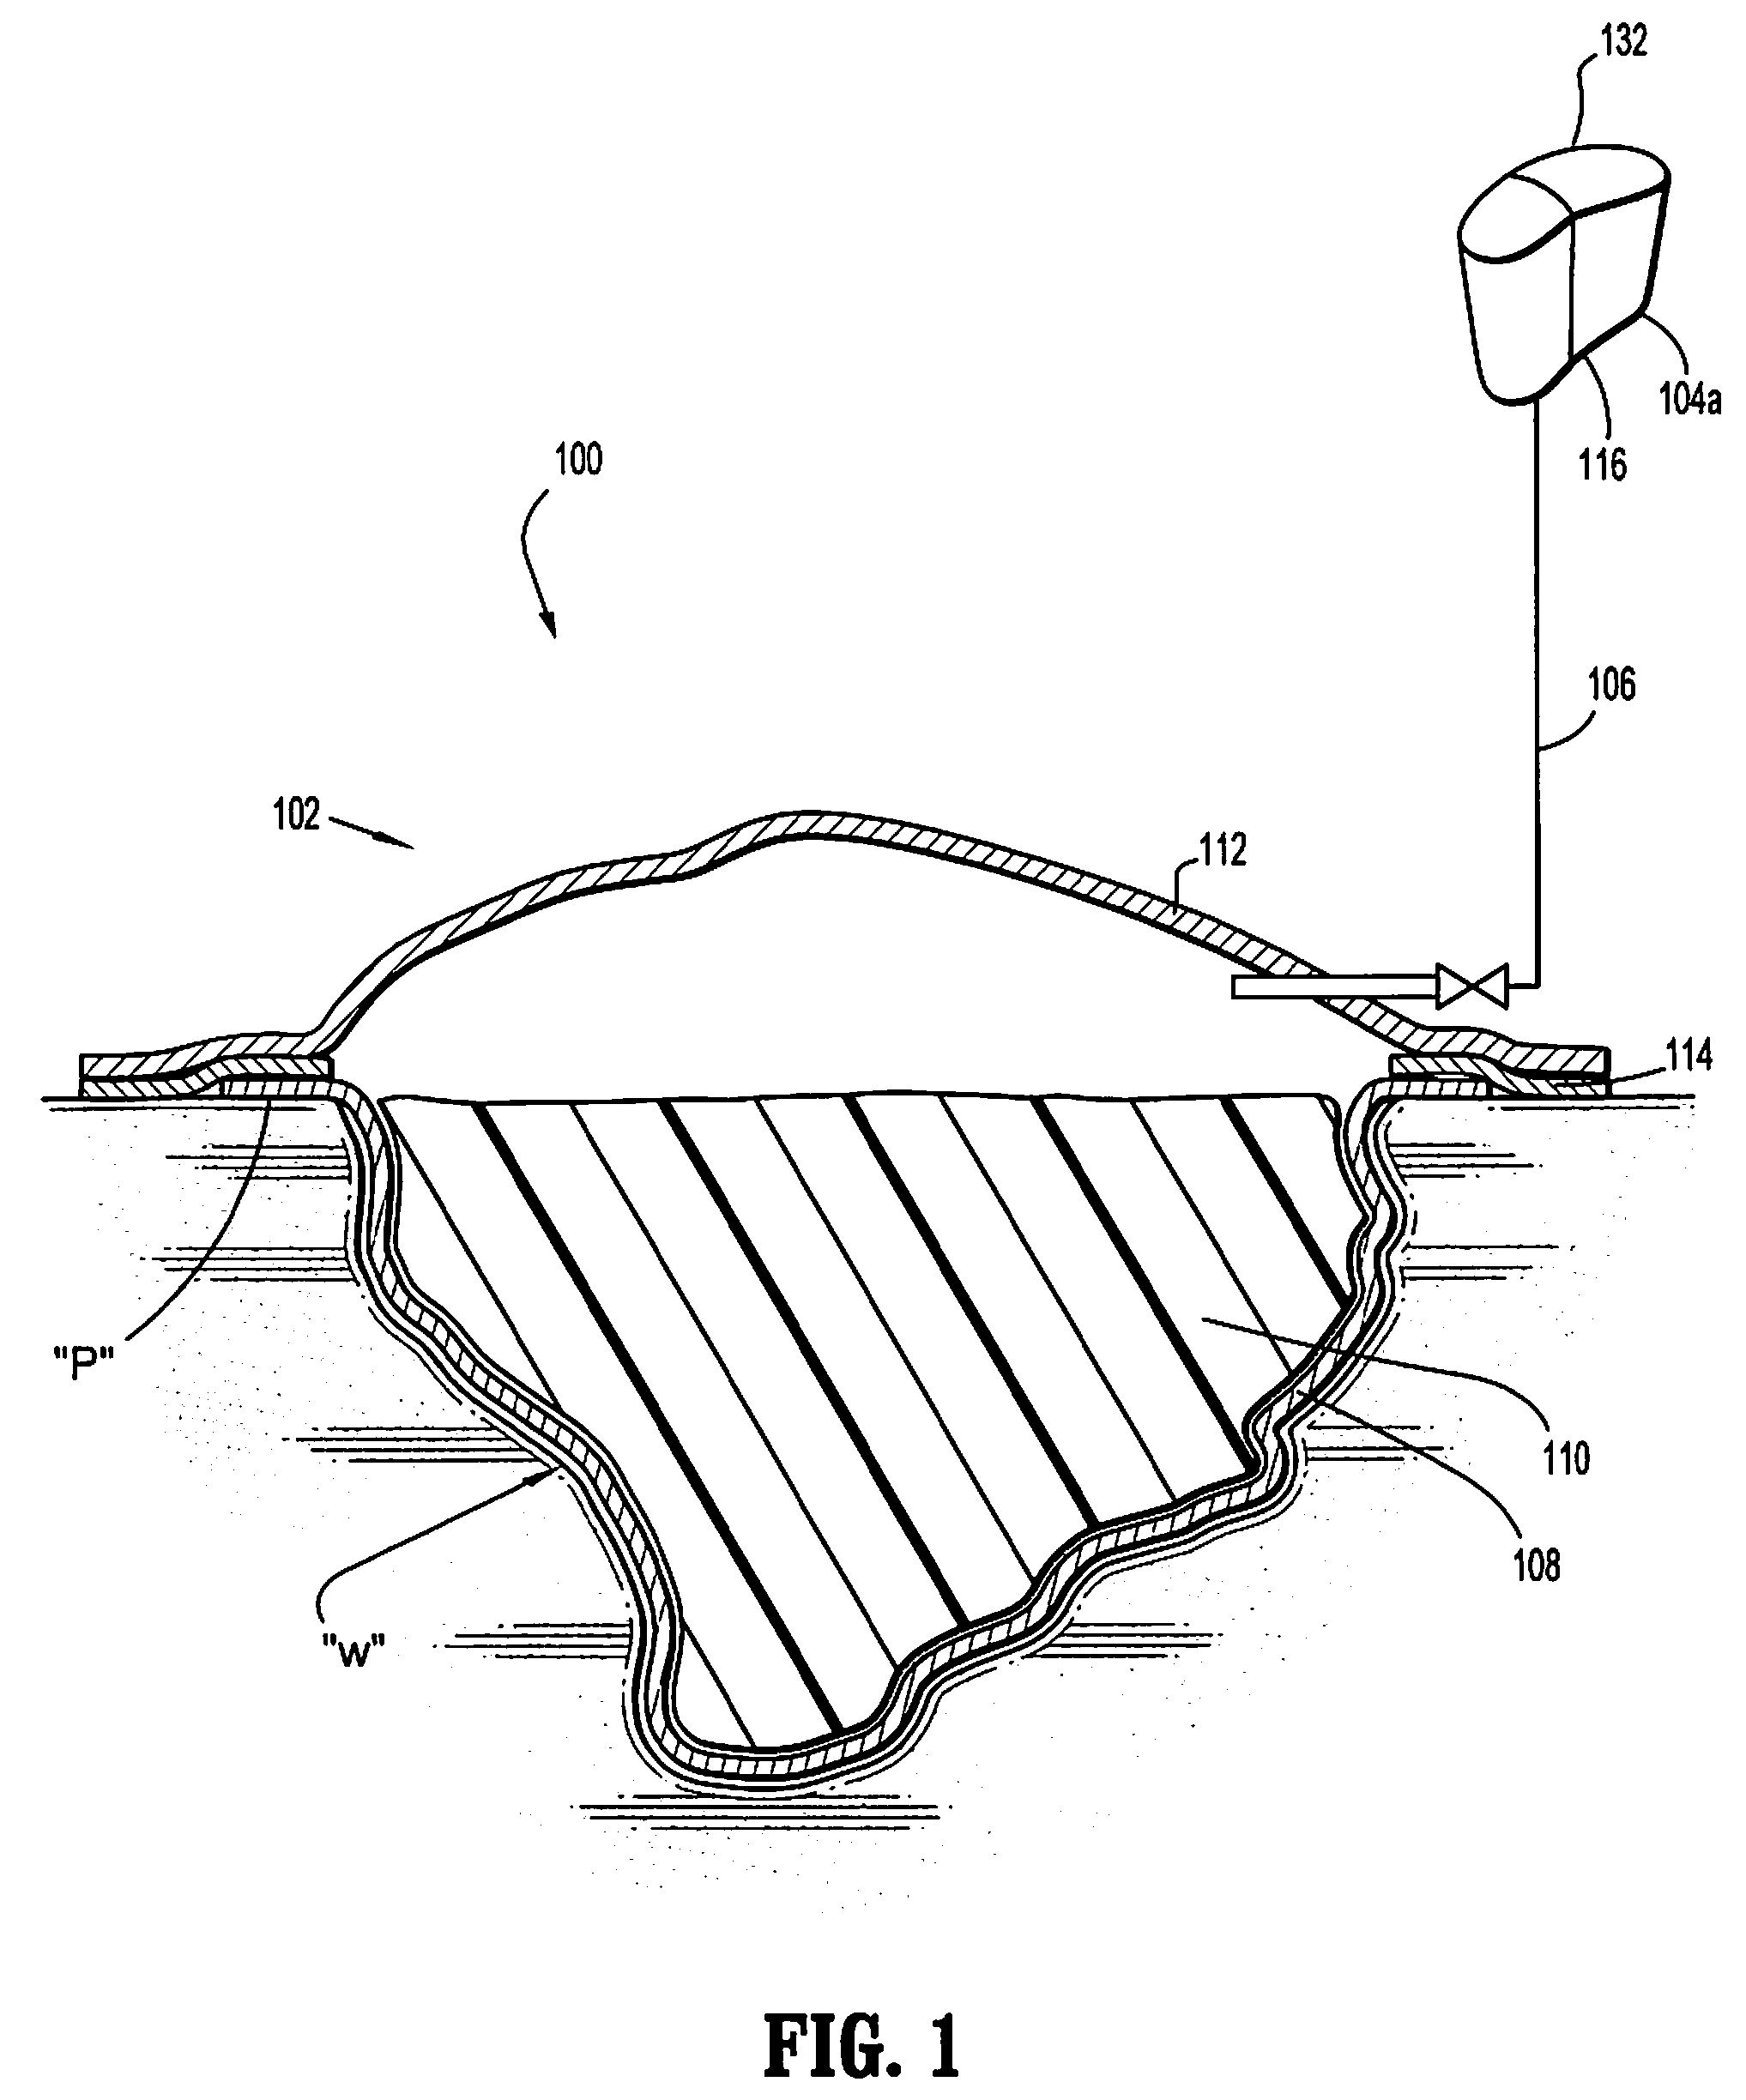 Wound therapy system with housing and canister support